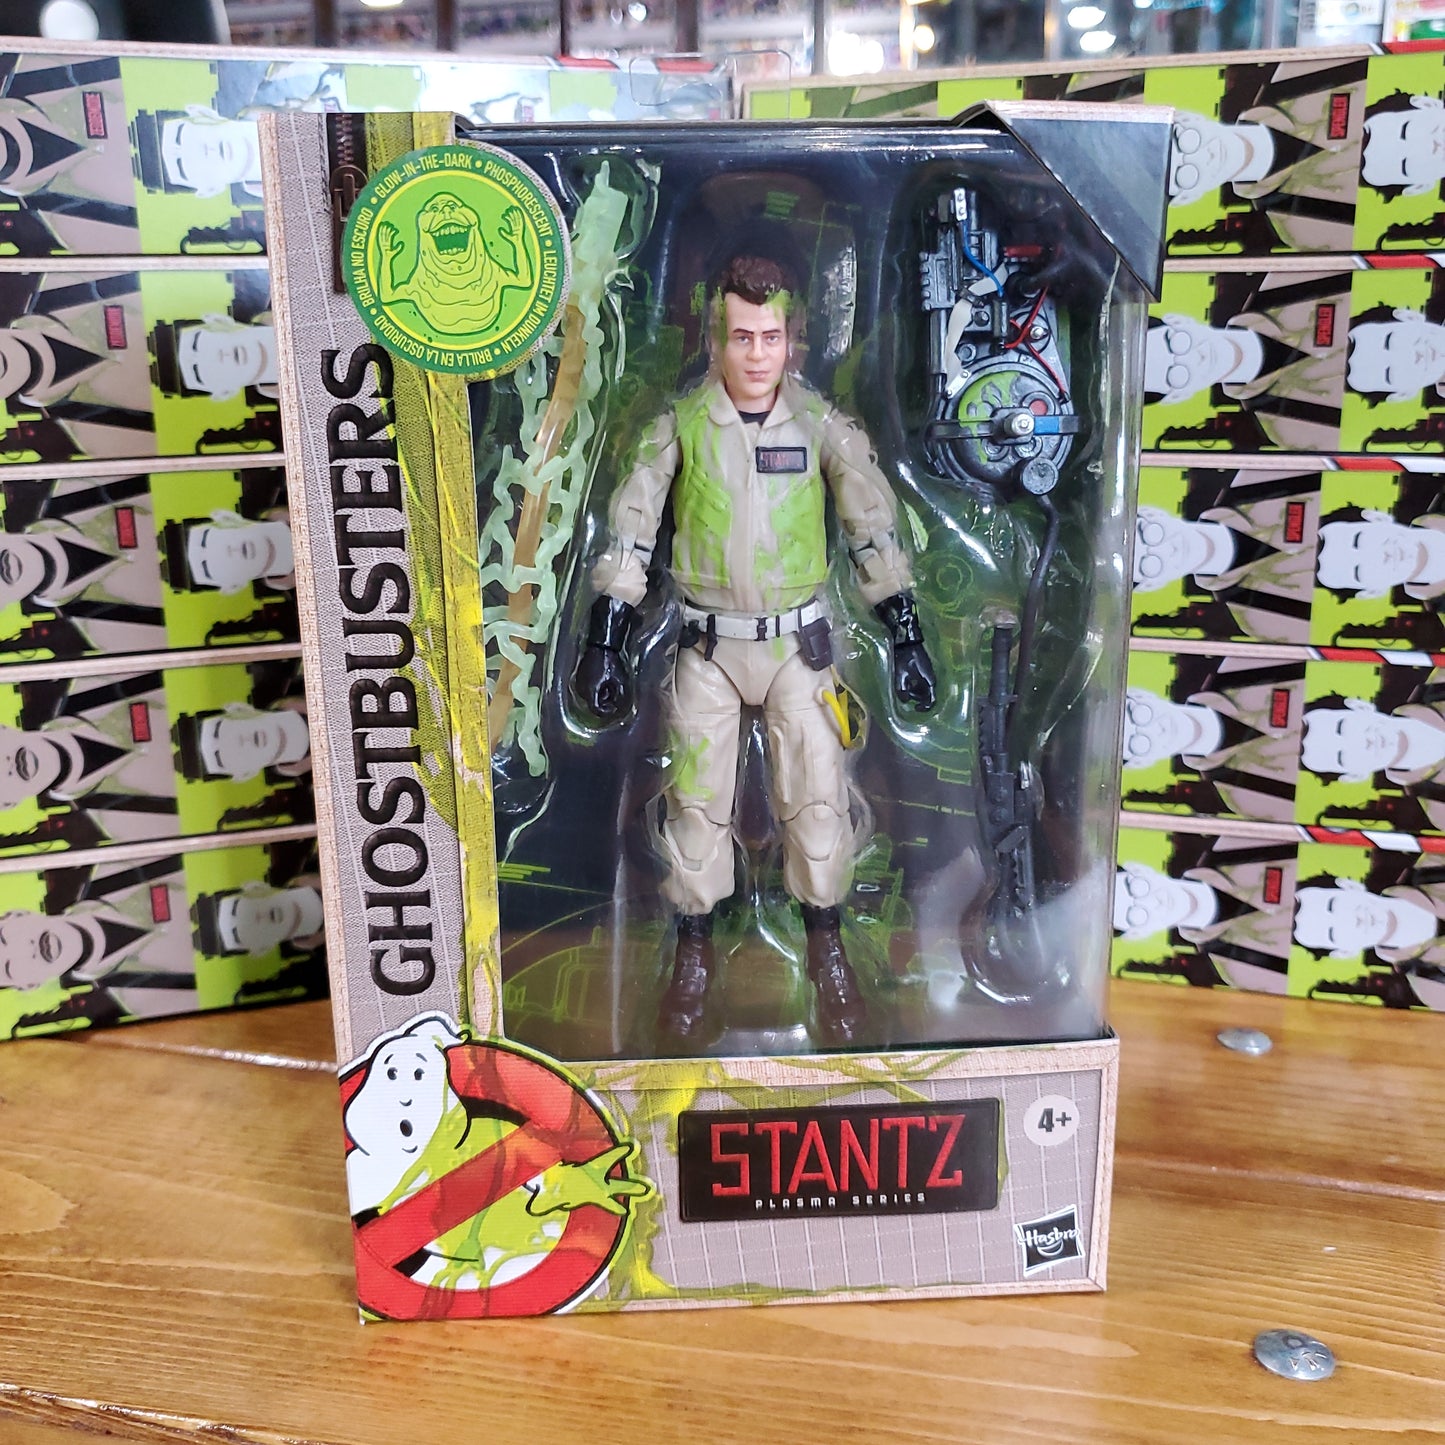 Ghostbusters - Slimed Stantz - Plasma Series Action Figure by Hasbro